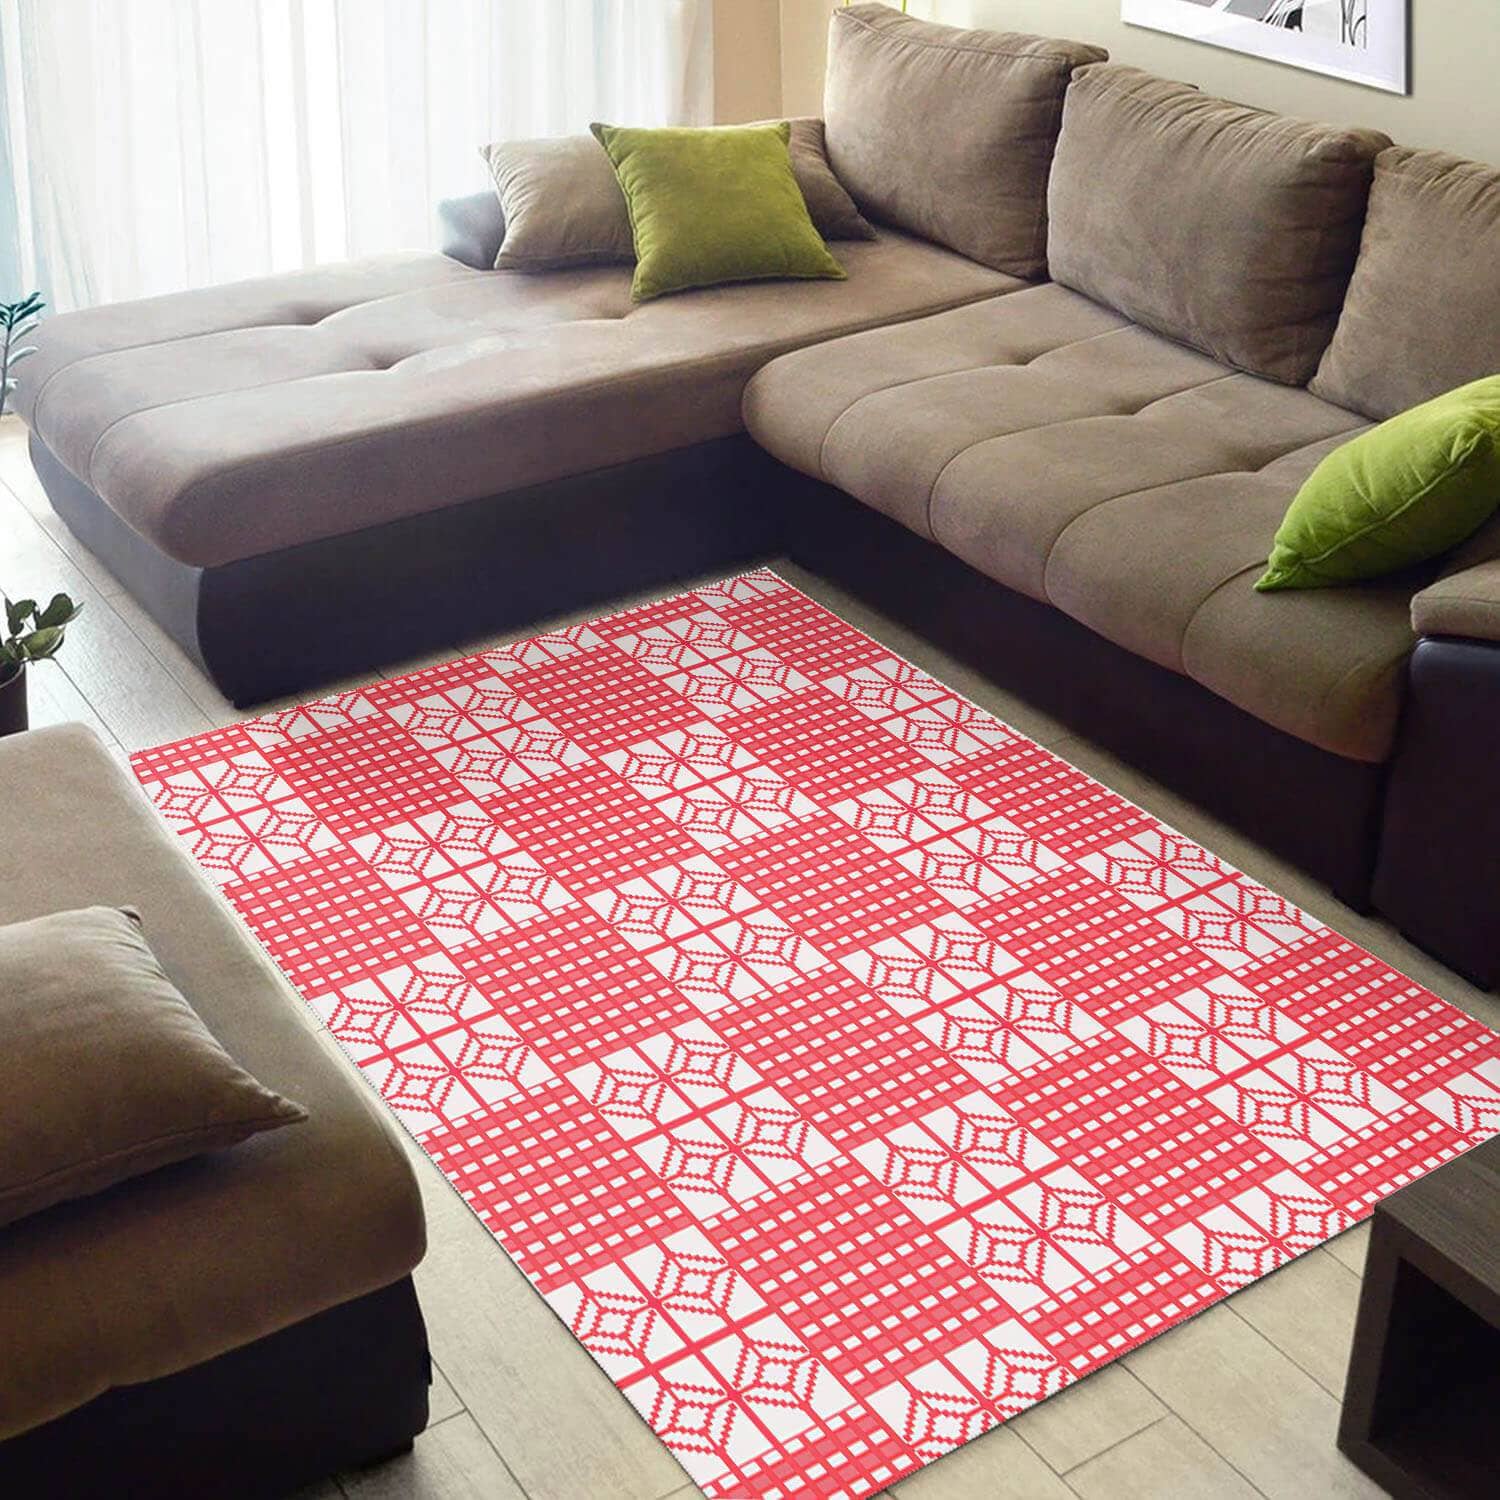 Cool African Style Graphic American Ethnic Seamless Pattern Large Themed Home Rug